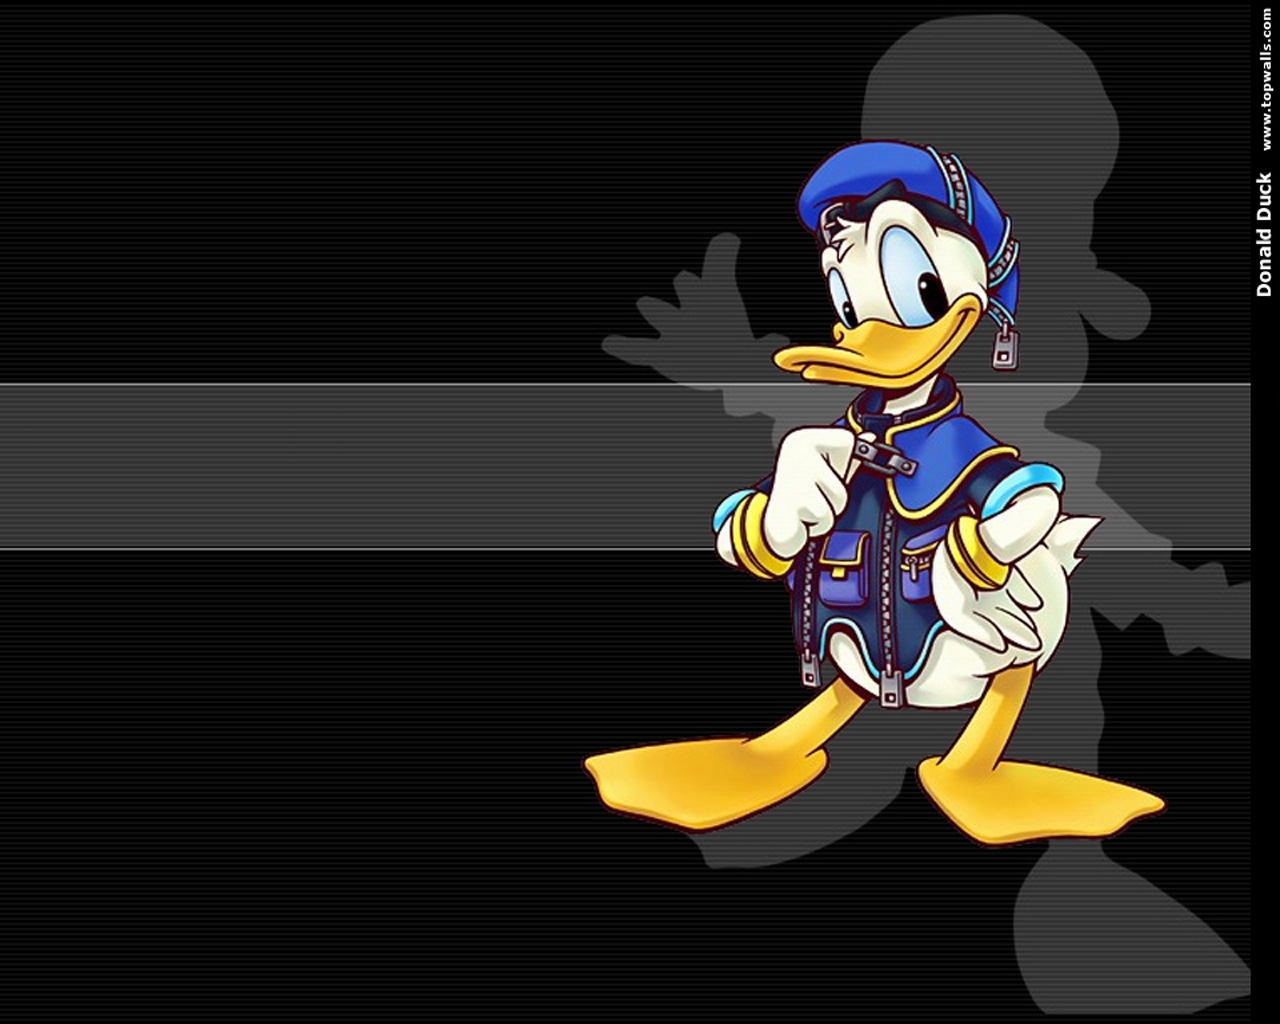 Animation Pictures Wallpapers: Donald Duck Wallpapers